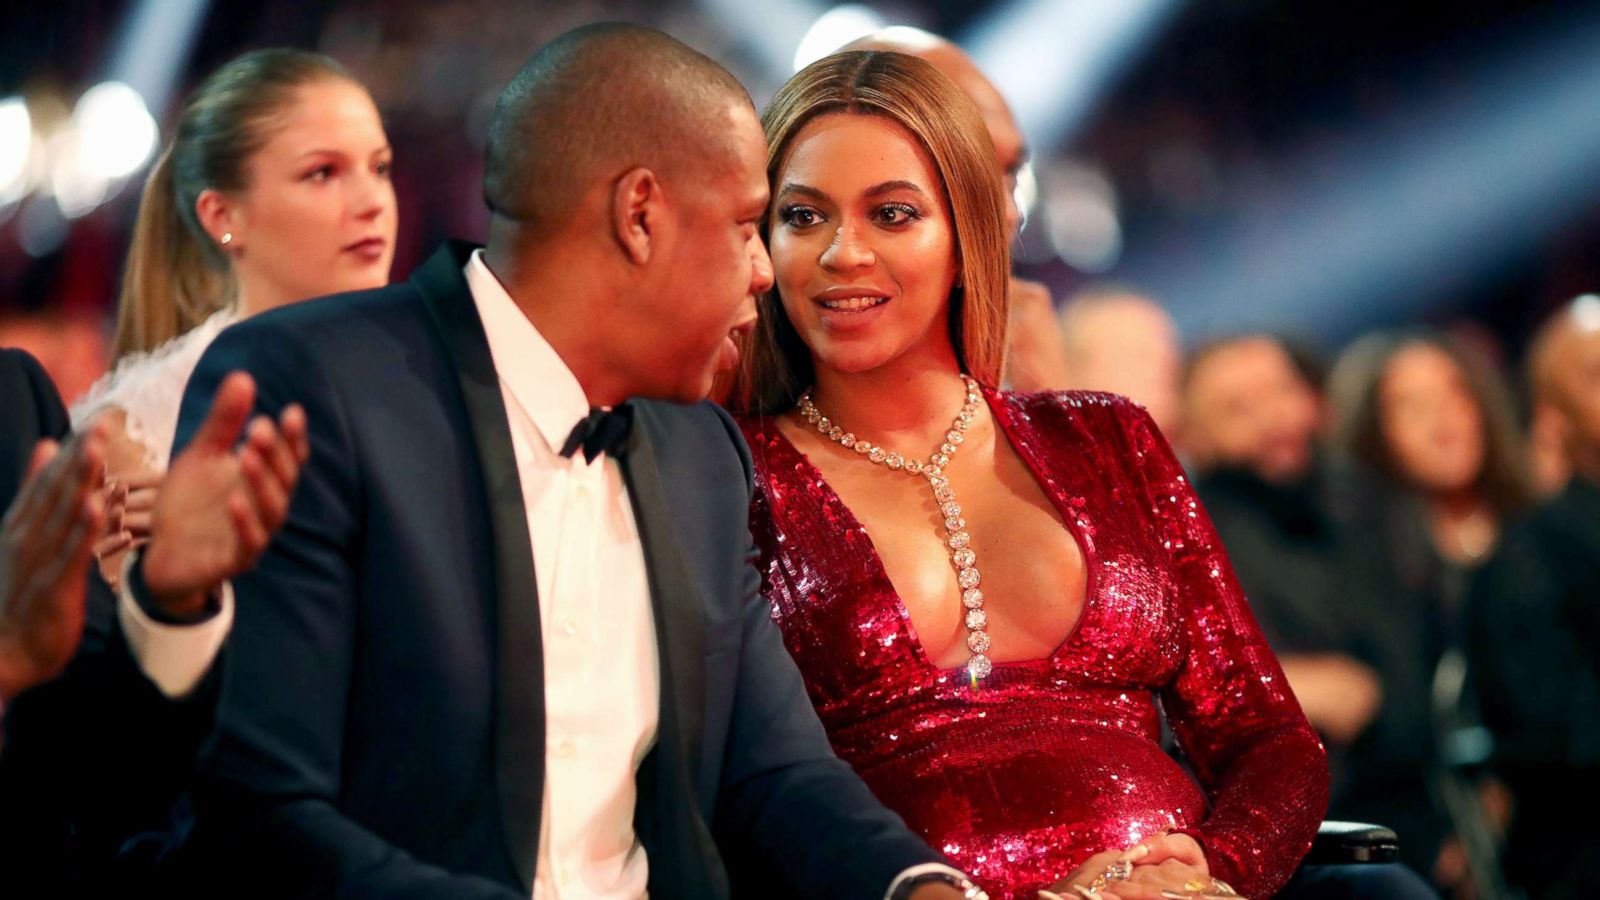 Jay-Z and Beyonce's once-troubled marriage in their own words - ABC News